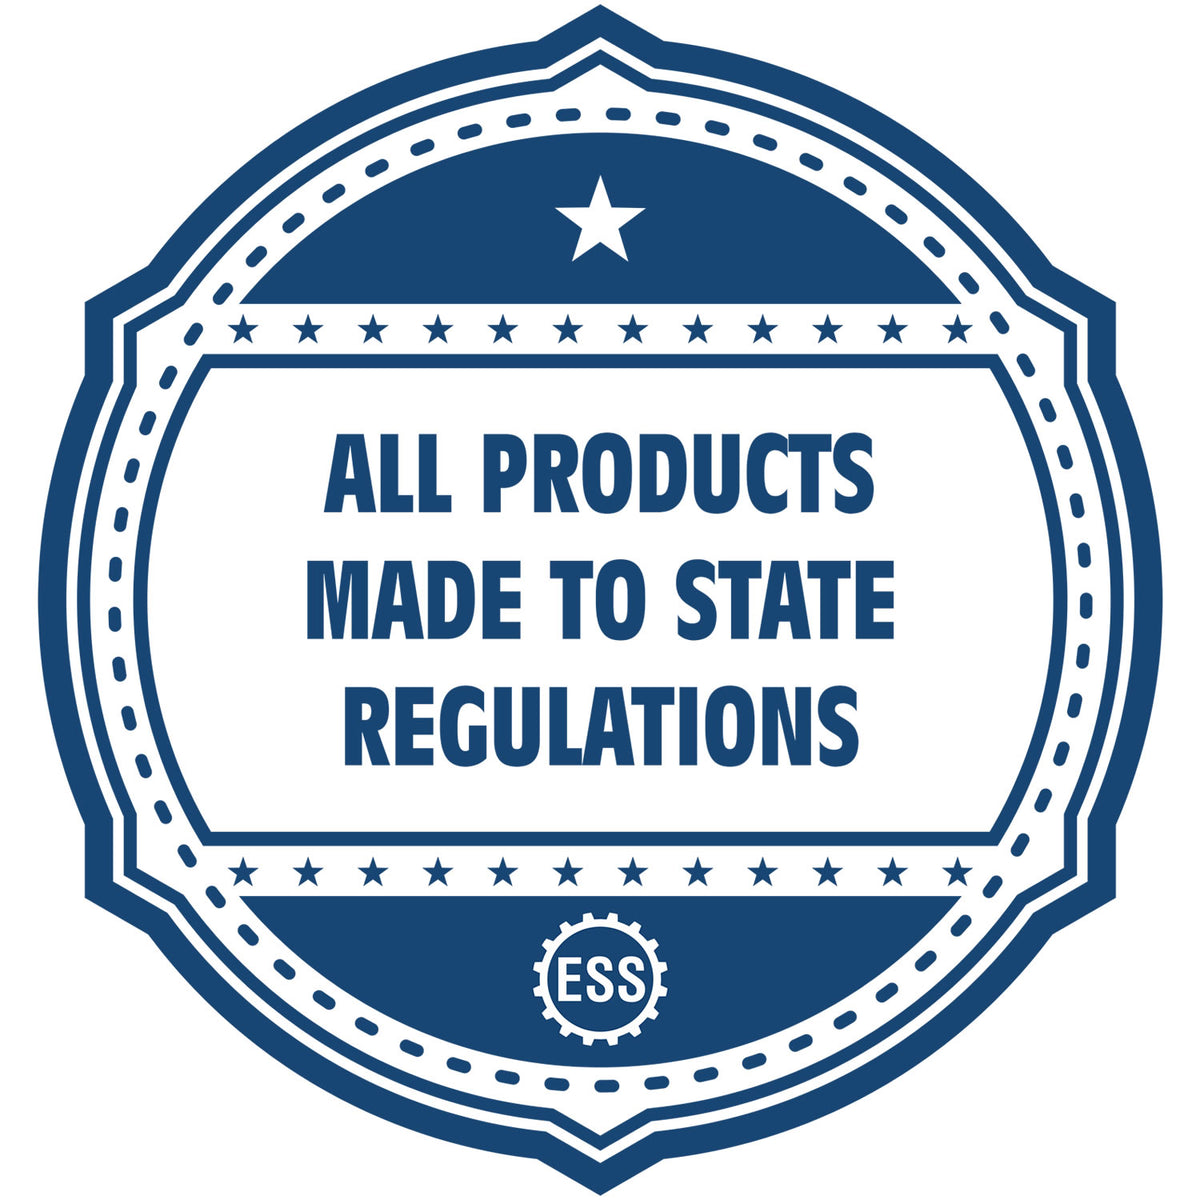 A blue icon or badge for the Self-Inking Illinois Geologist Stamp showing that this product is made in compliance with state regulations.